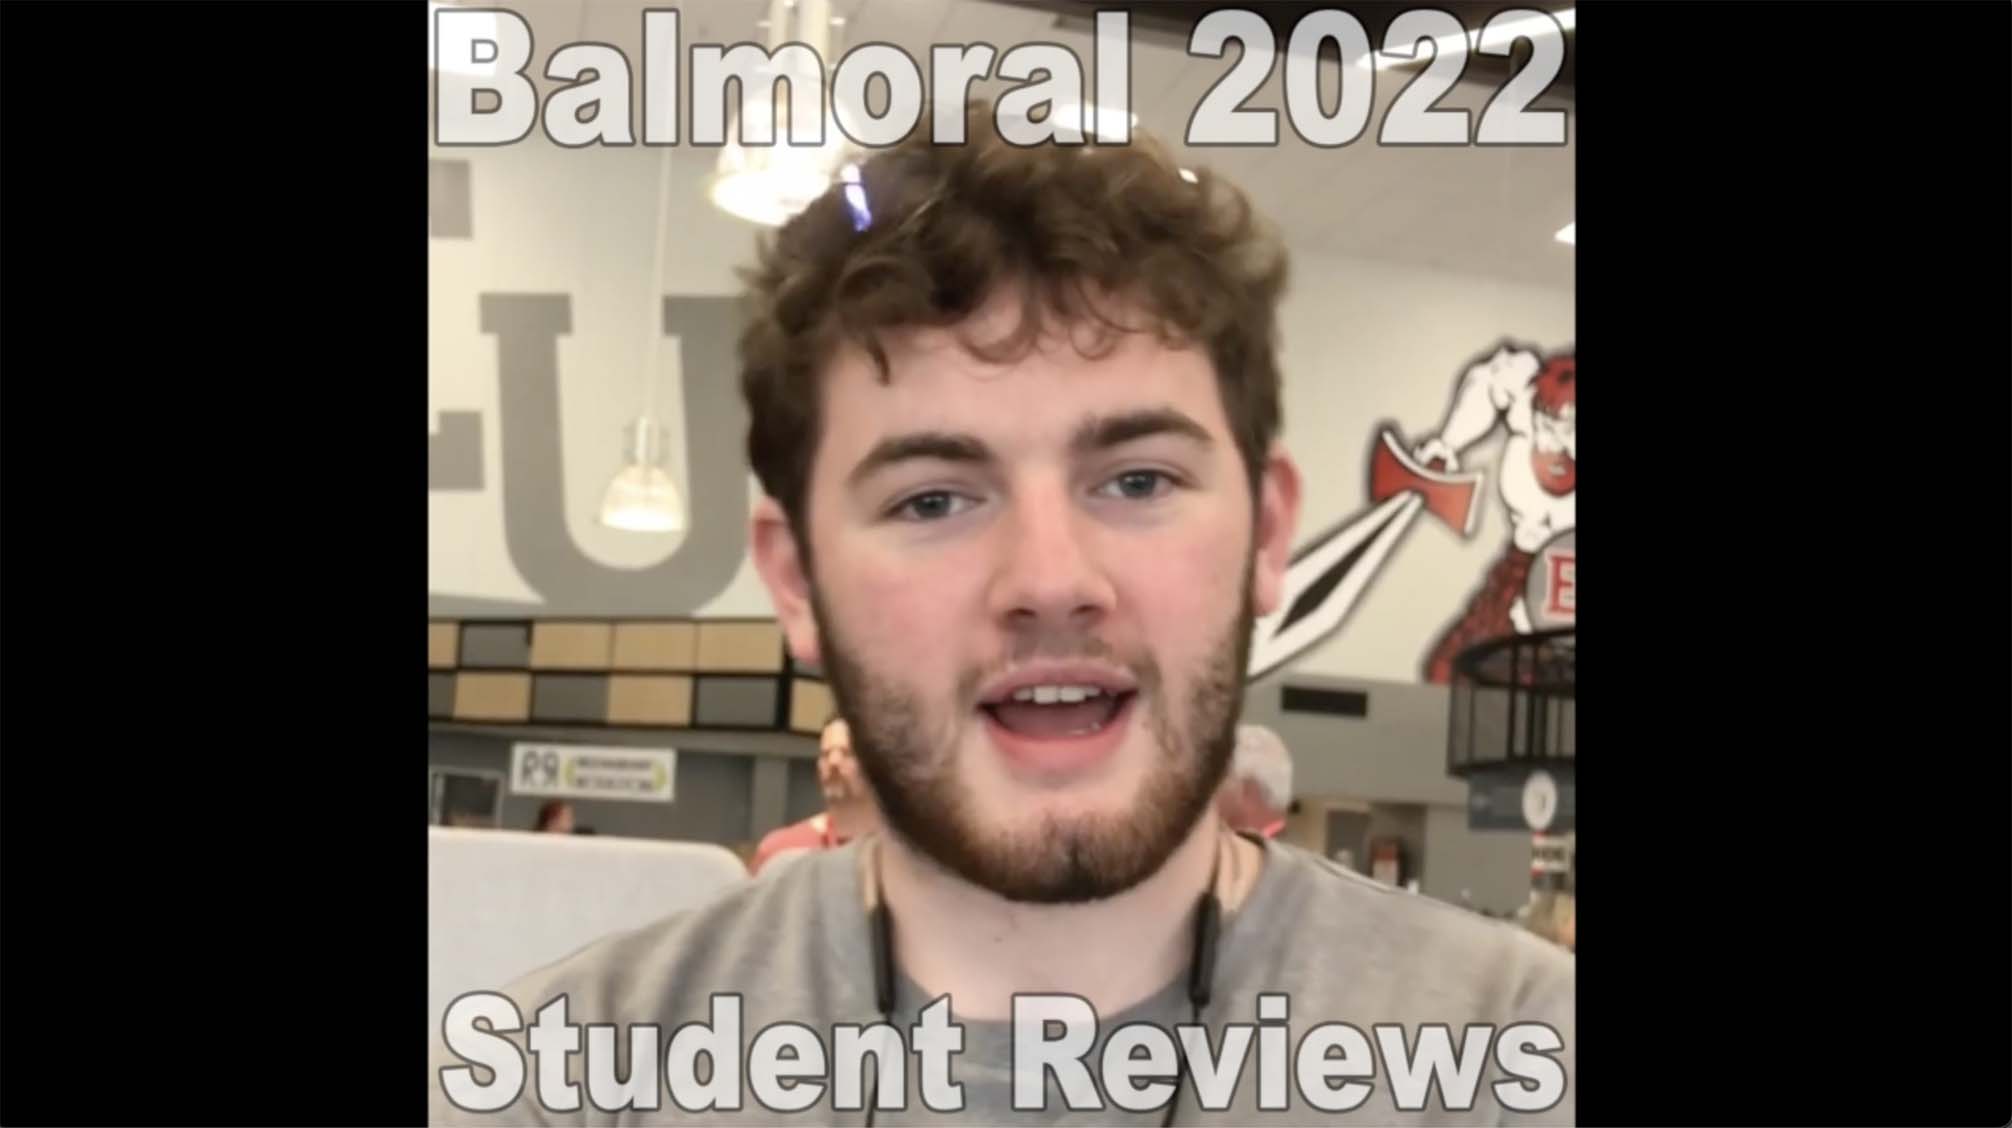 The reviews are in as our Balmoral's Summer Students give testimonials to our 2022 Piping & Drumming Summer Camp in Edinboro.